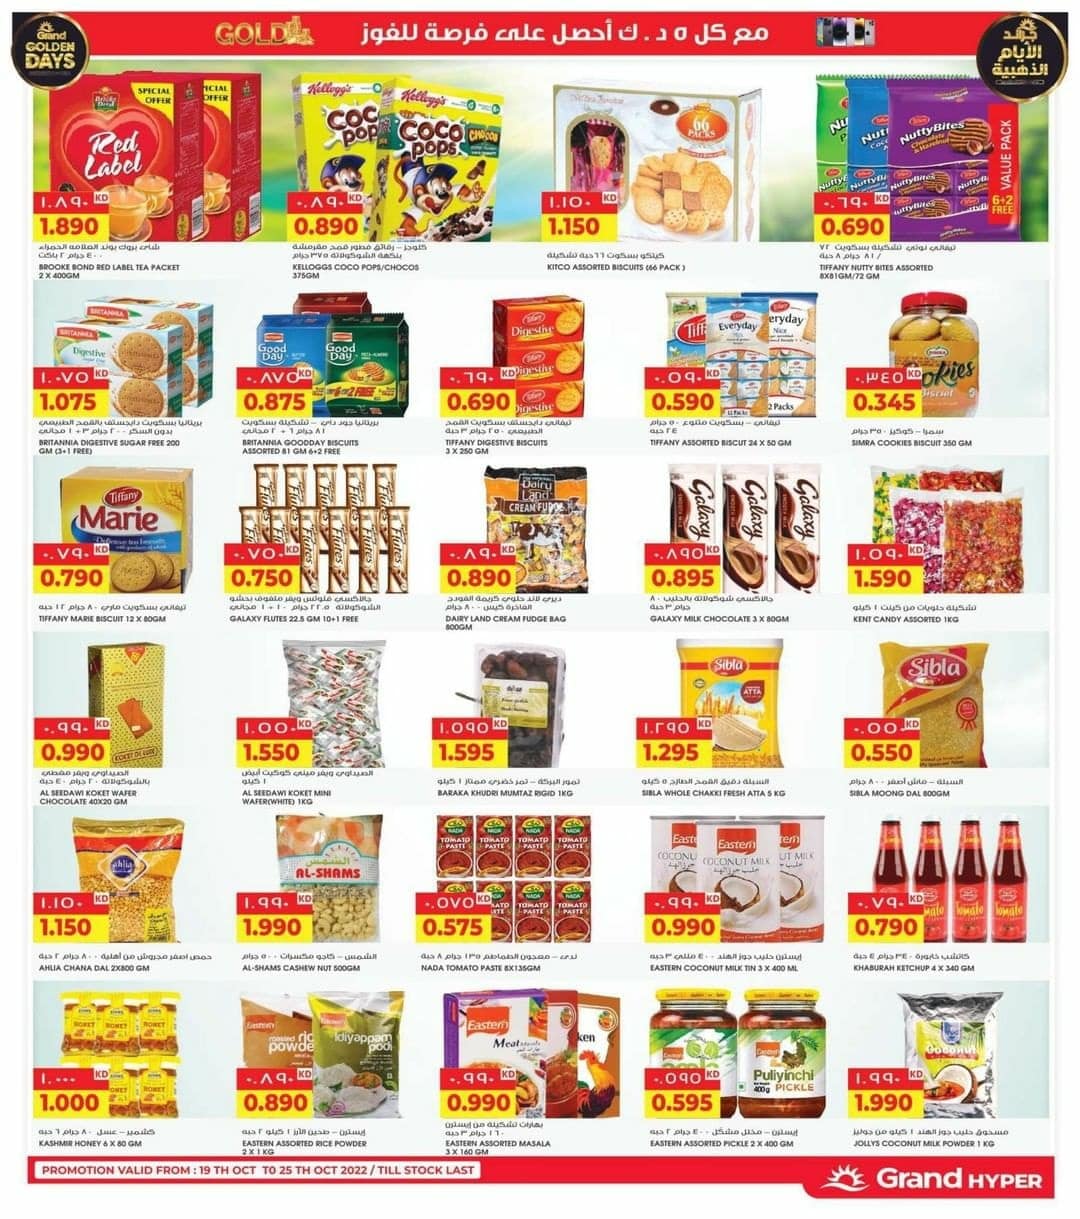 Grand Hyper Special Diwali offers 70%, Kuwait Promotions 3